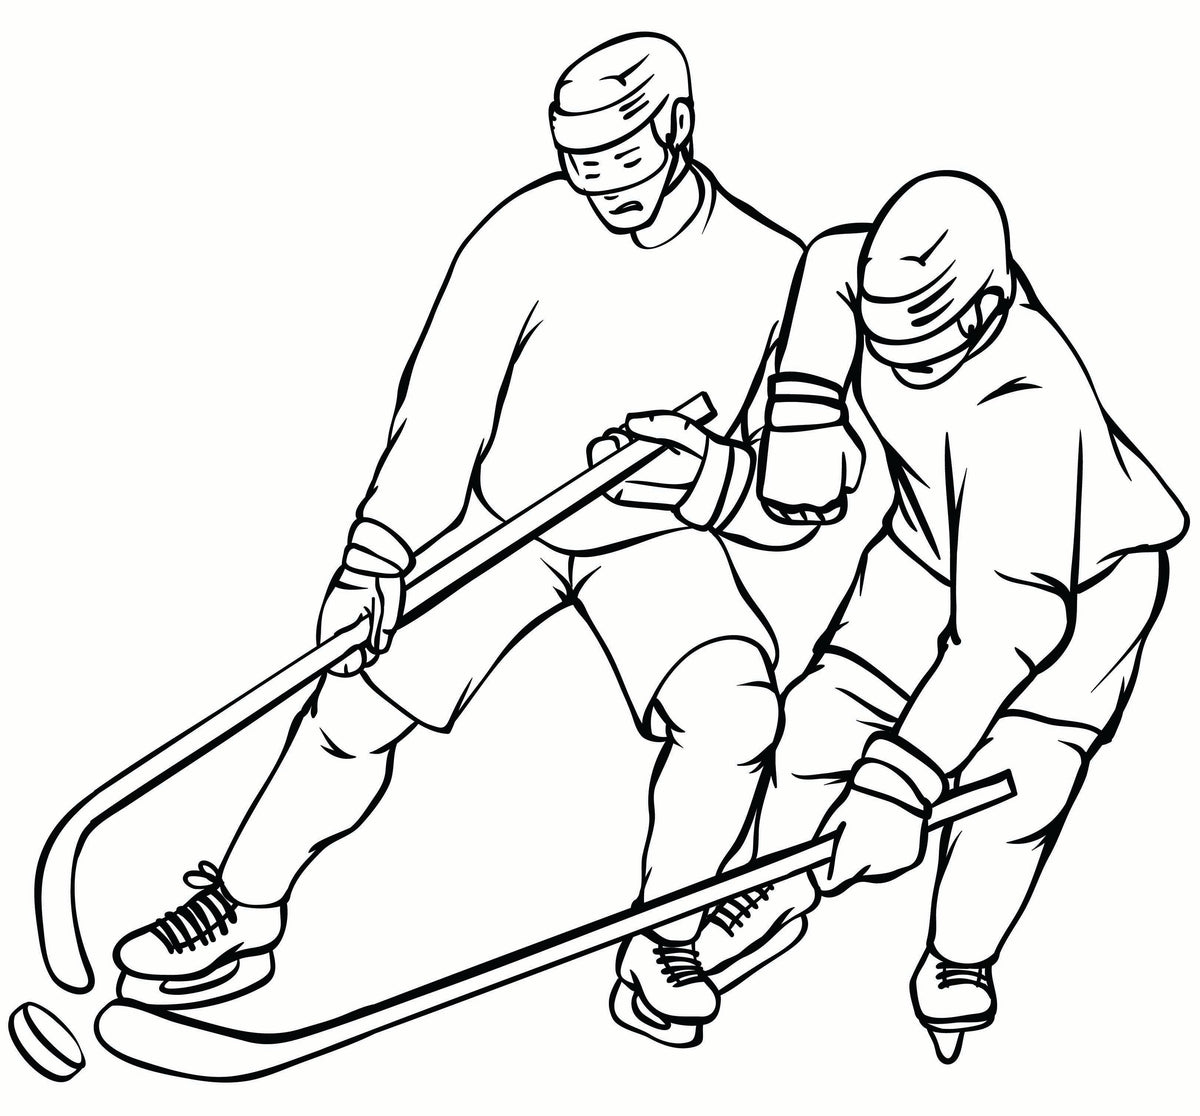 sports coloring pages hockey goalie